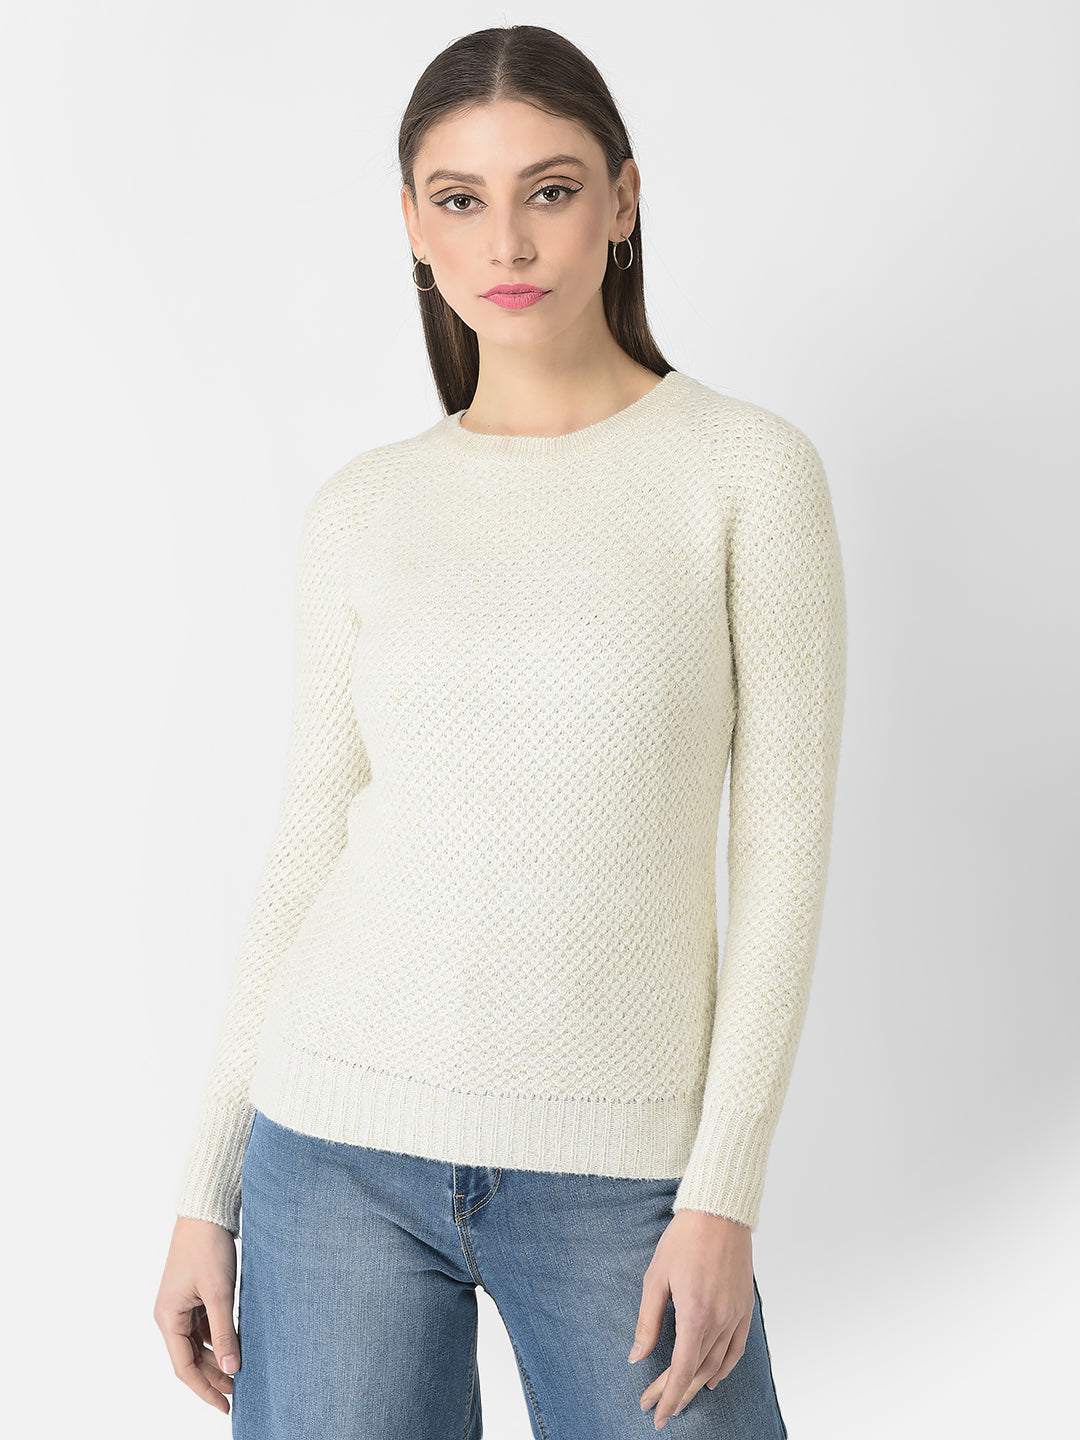  White Knitted Sweater 